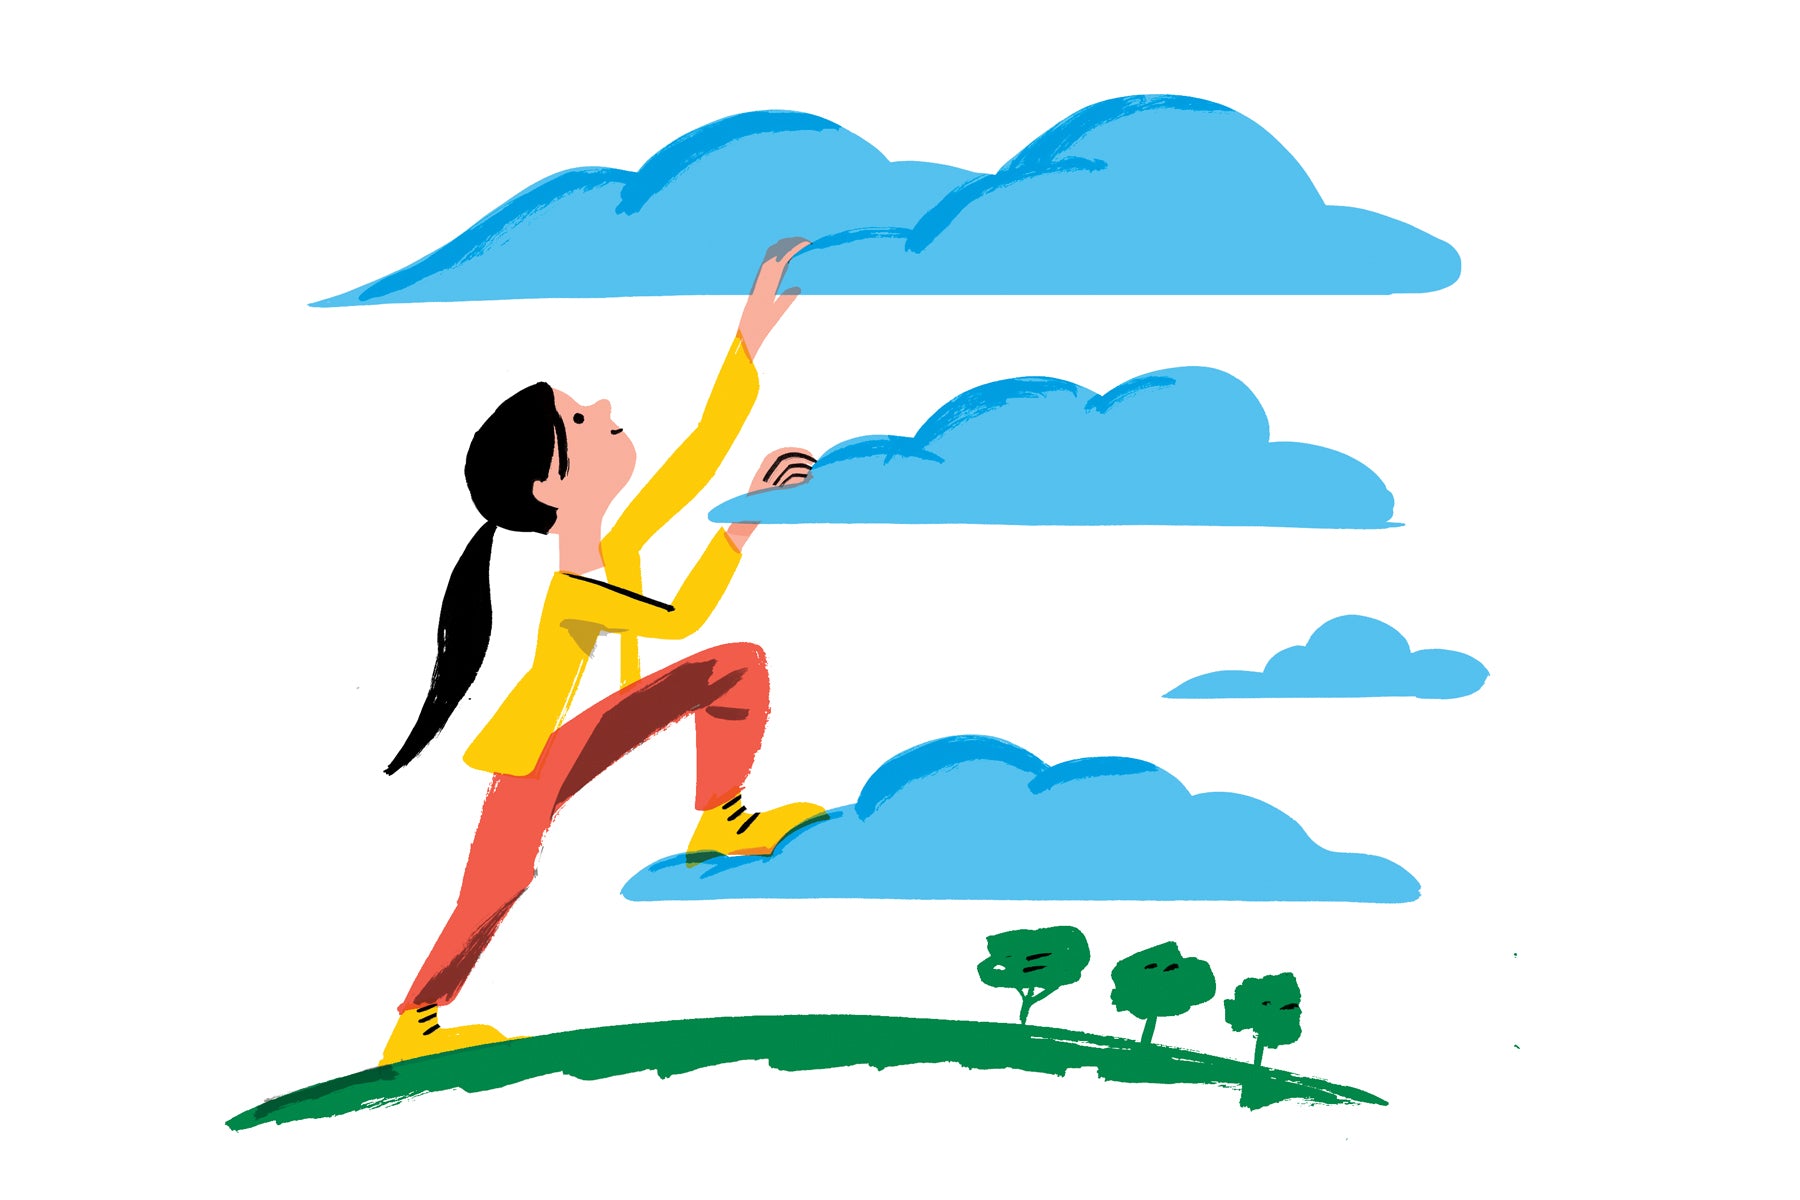 Illustration of a young girl with brown hair climbing the clouds as though they are stairs to convey the idea of reaching her future goals. 